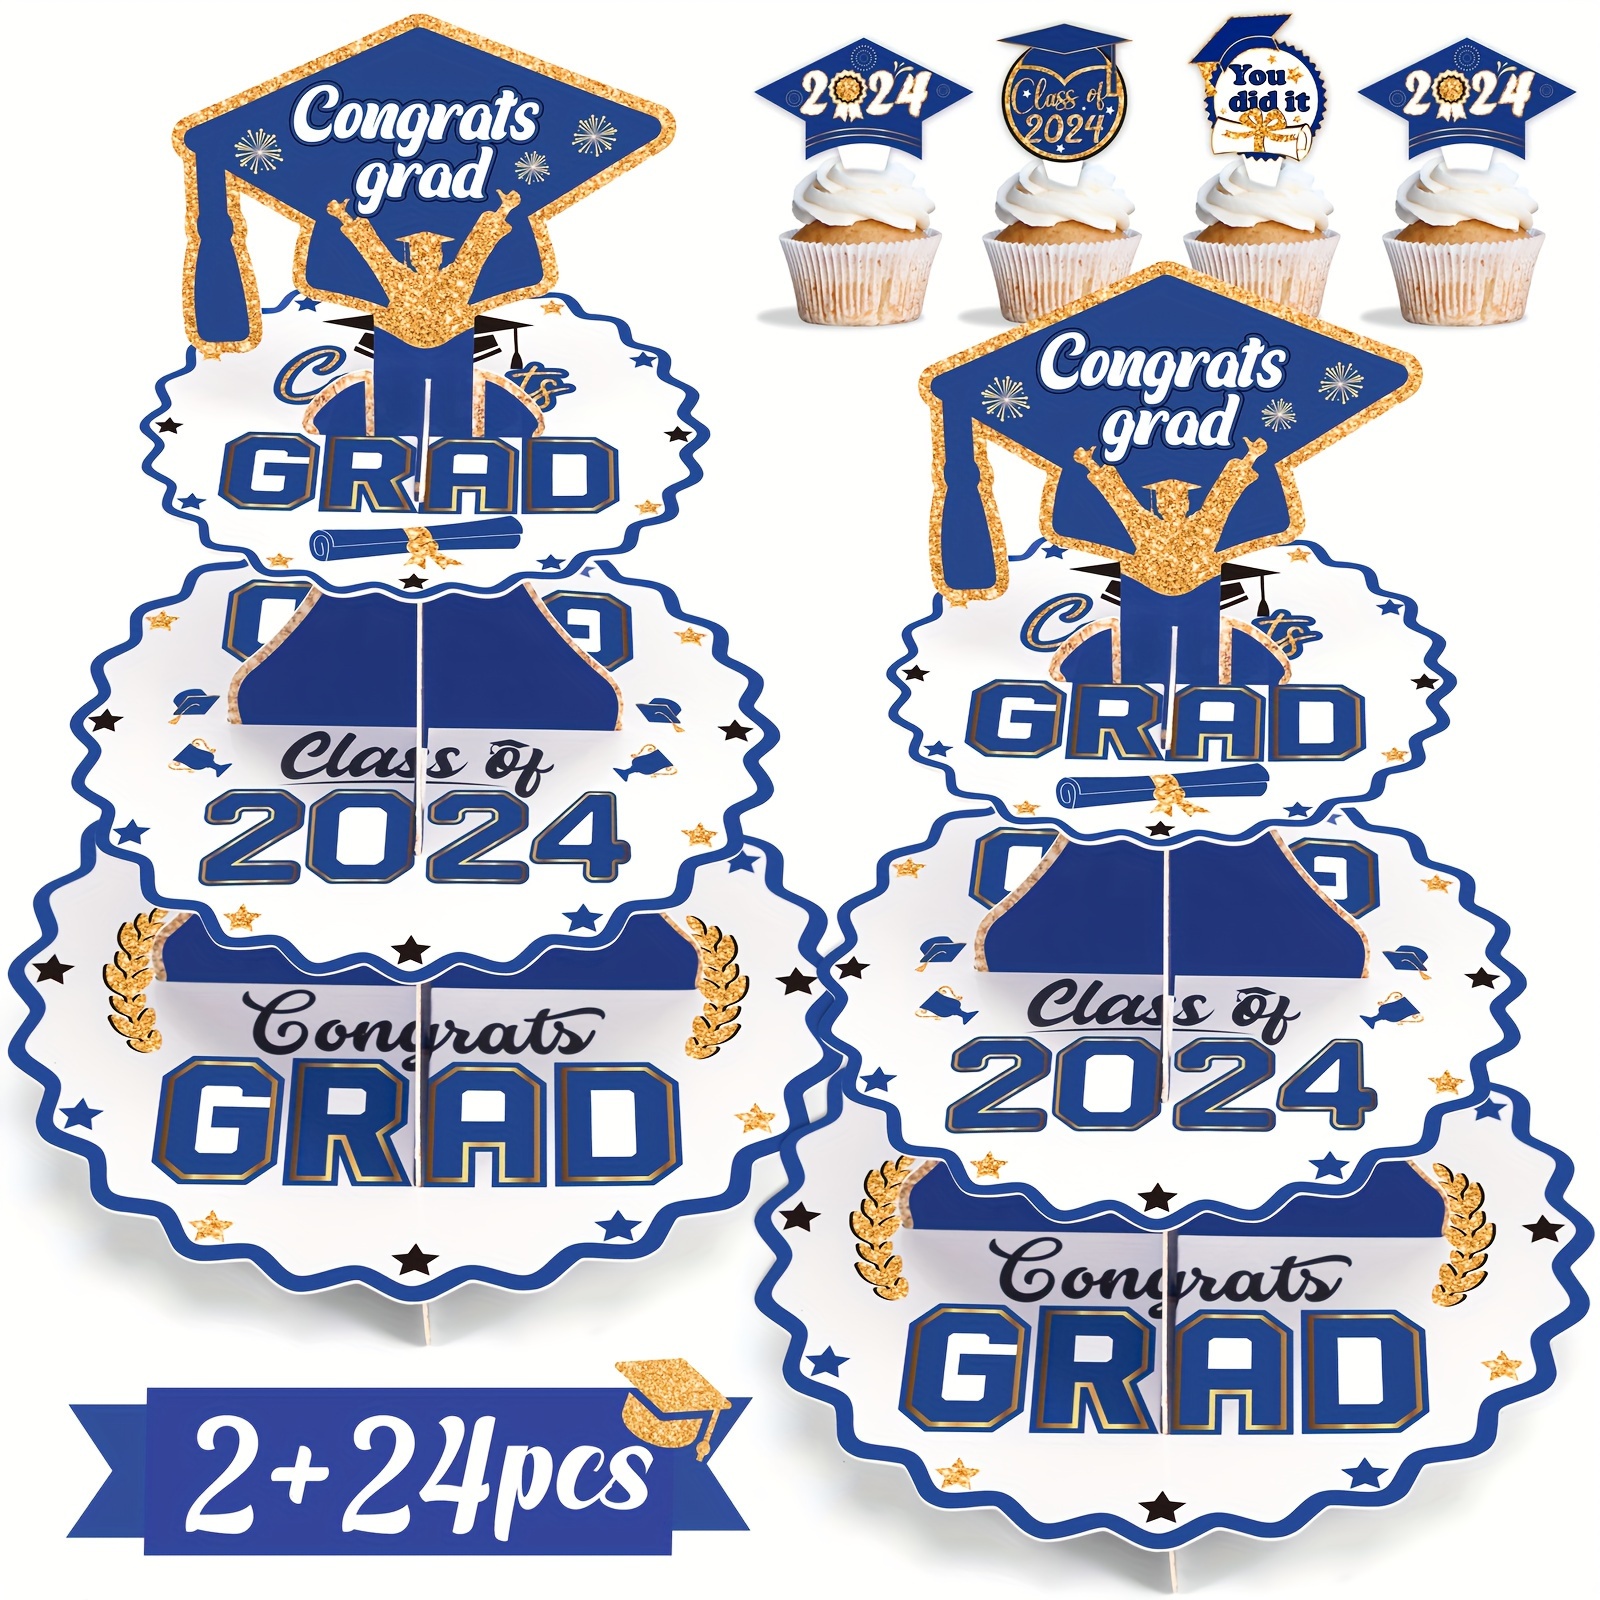 

2set Graduation Decorations Class Of 2024 Blue And Gold Cupcake Stand, 3-tier Cardboard Congrats Grad Tower Plus 24 Cake Toppers Party Supplies Decor(assembly Needed)